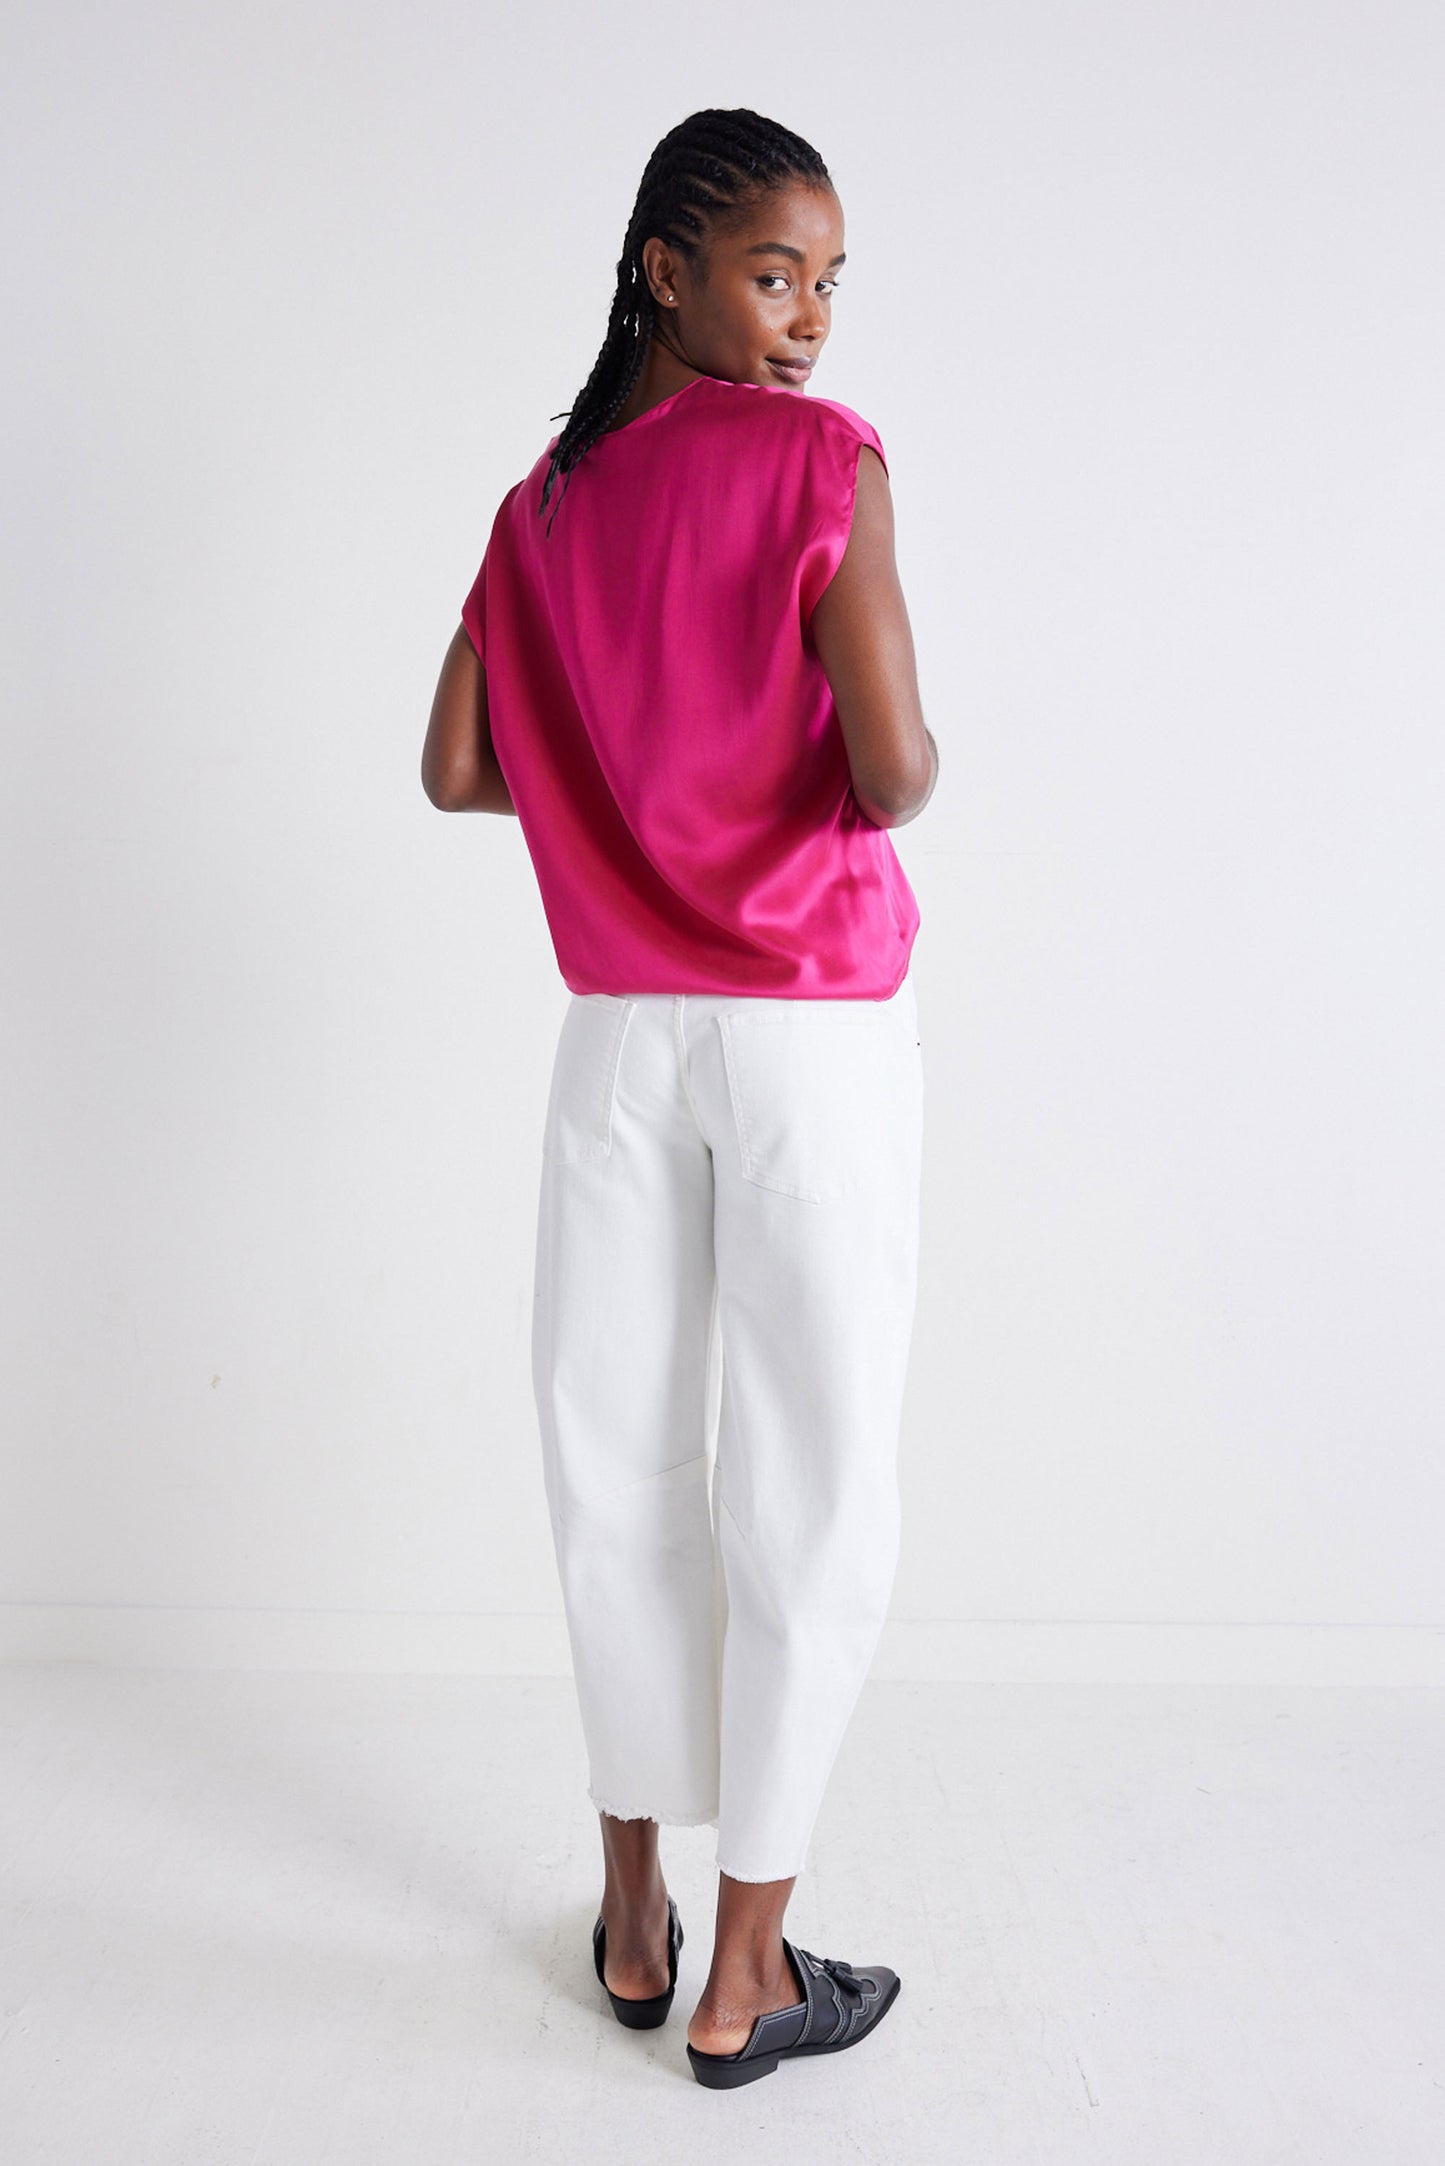 The All Day Washable Silk Top